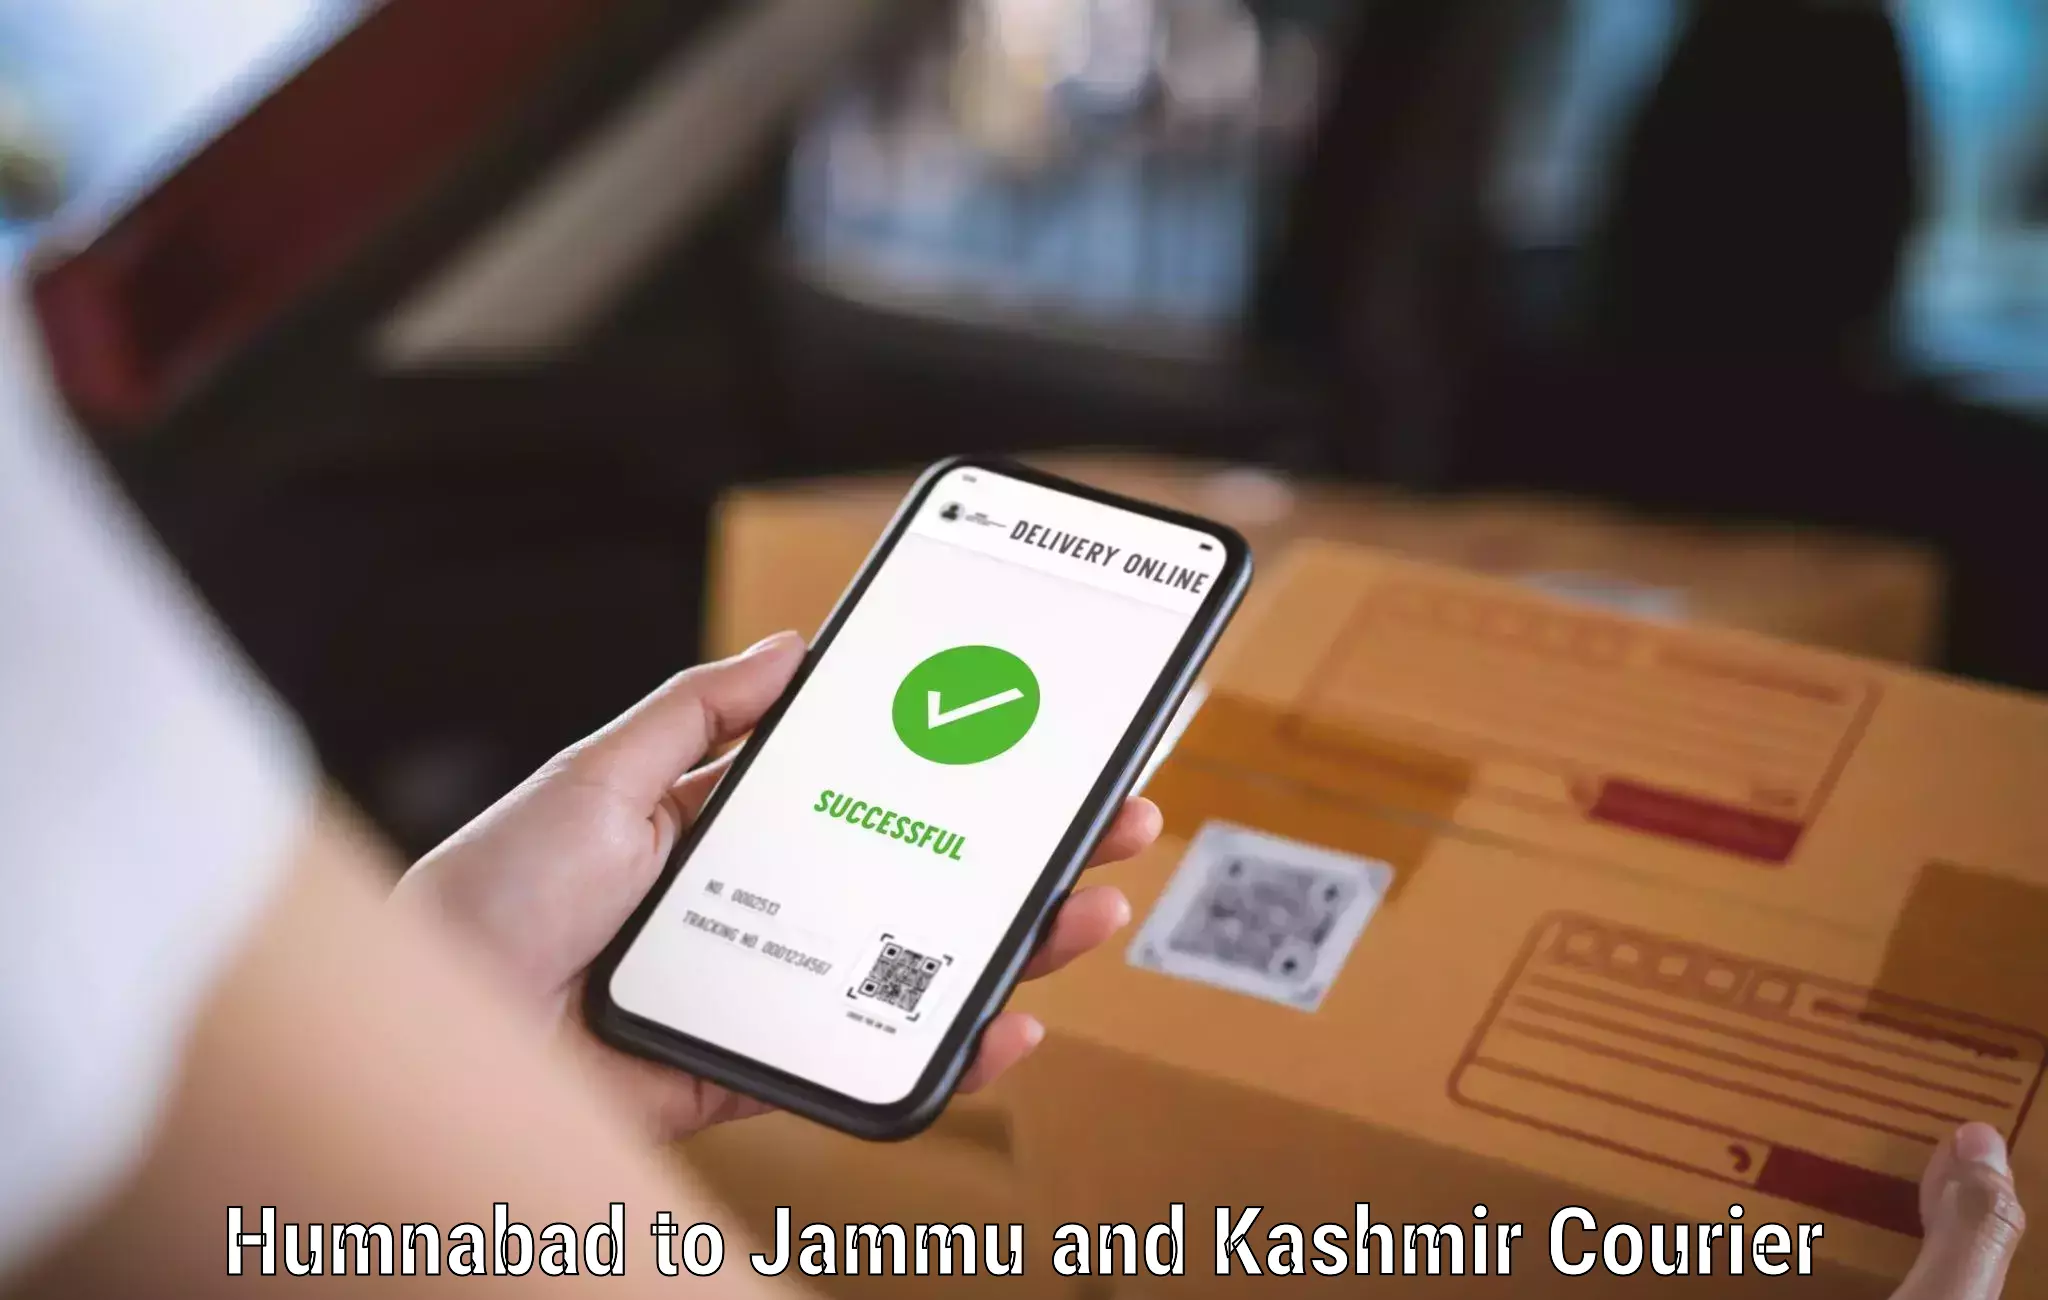 Smart shipping technology in Humnabad to Leh